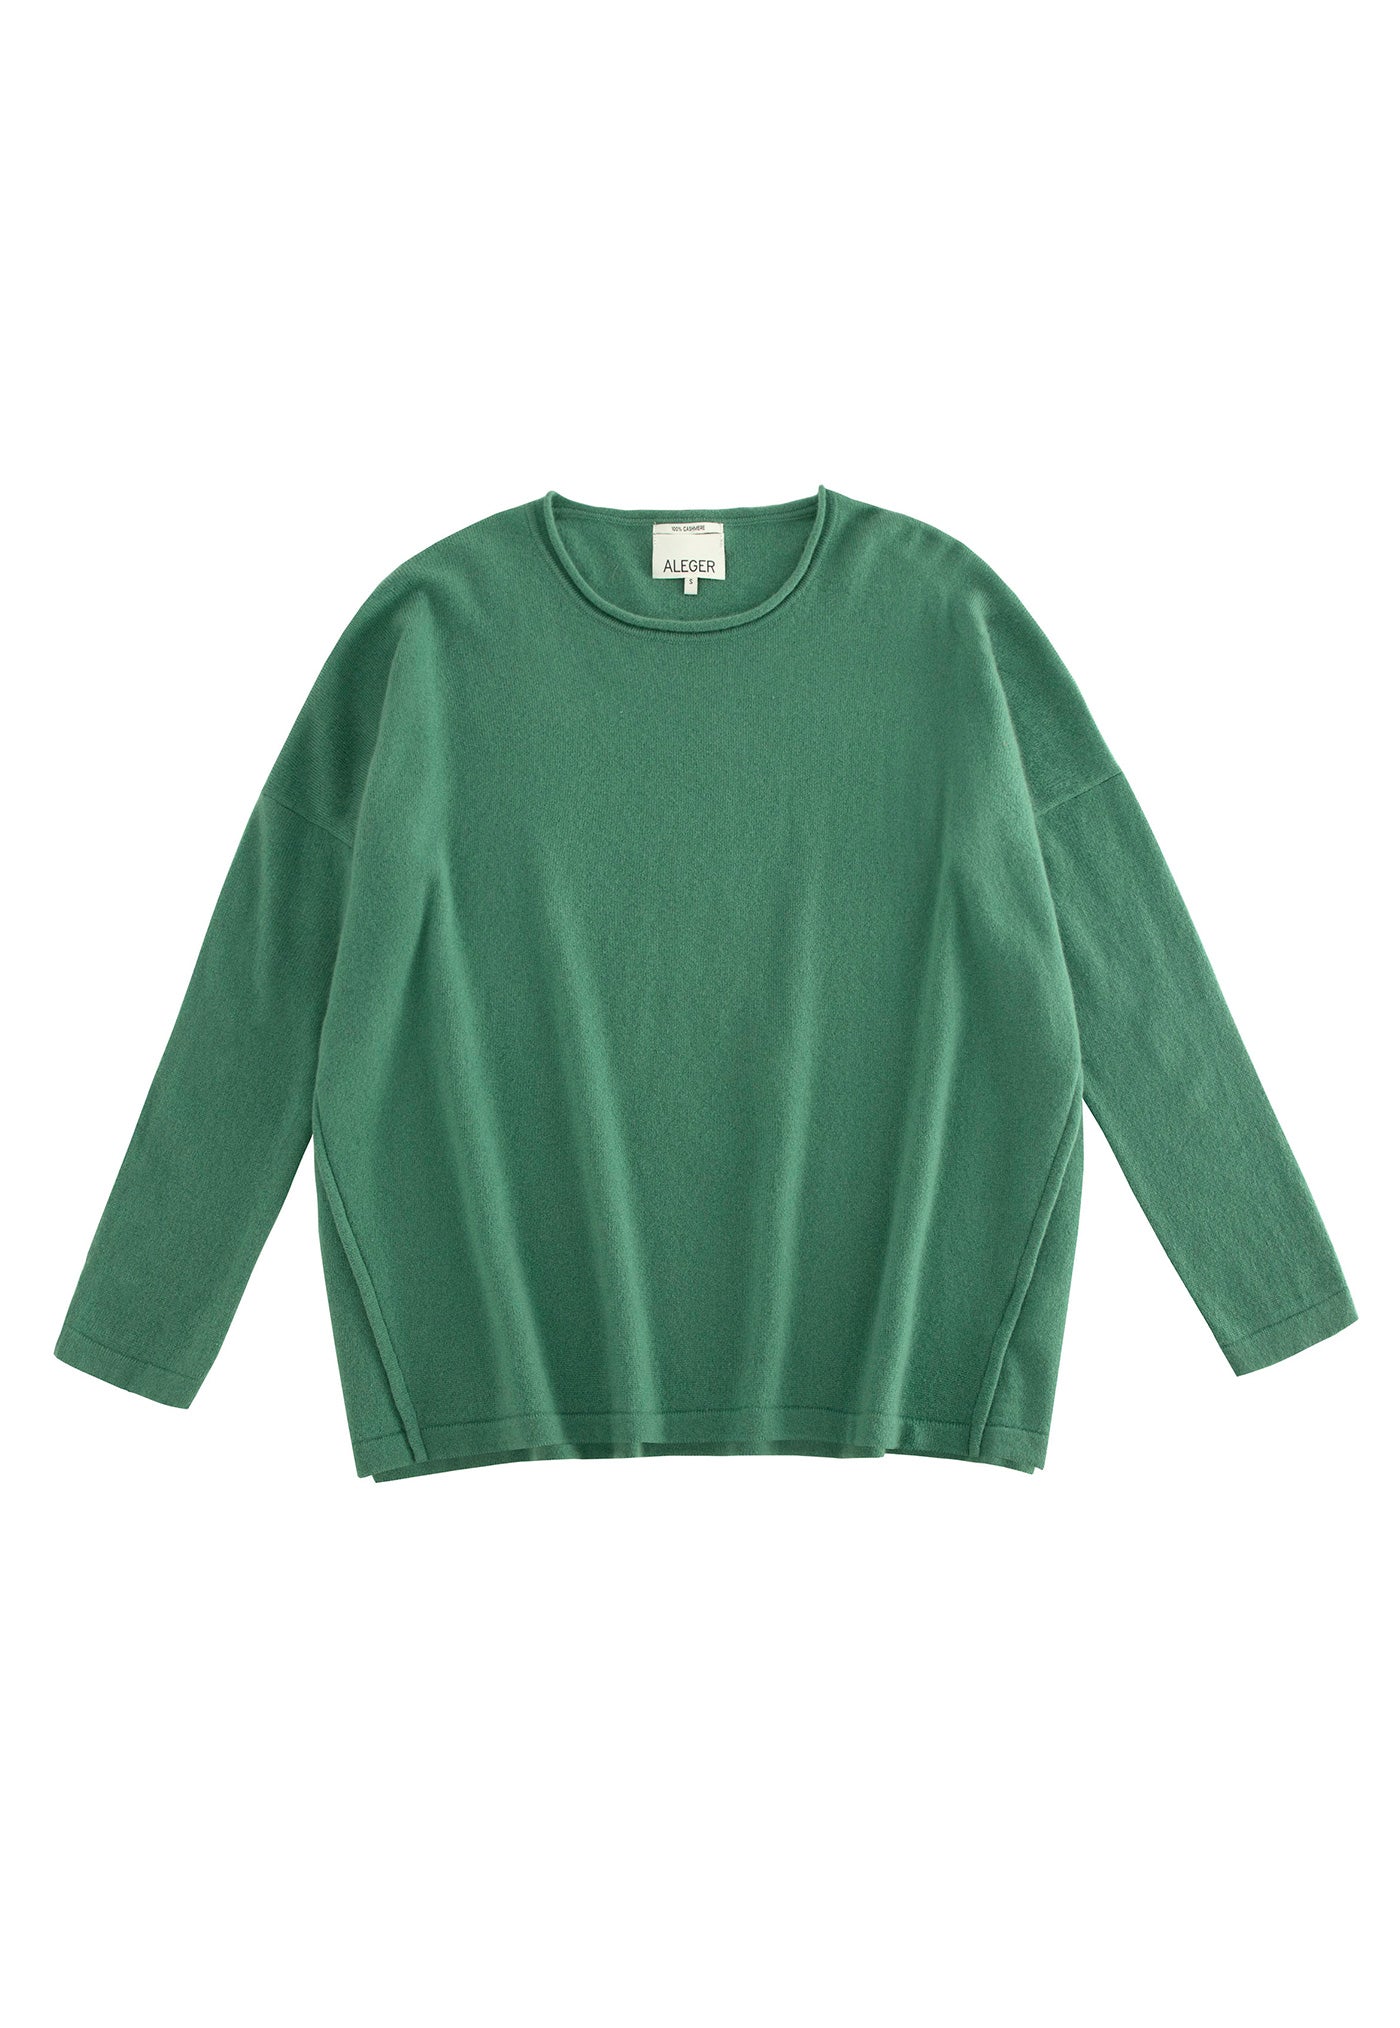 No.36 Slouchy Crew Neck - Aspen sold by Angel Divine